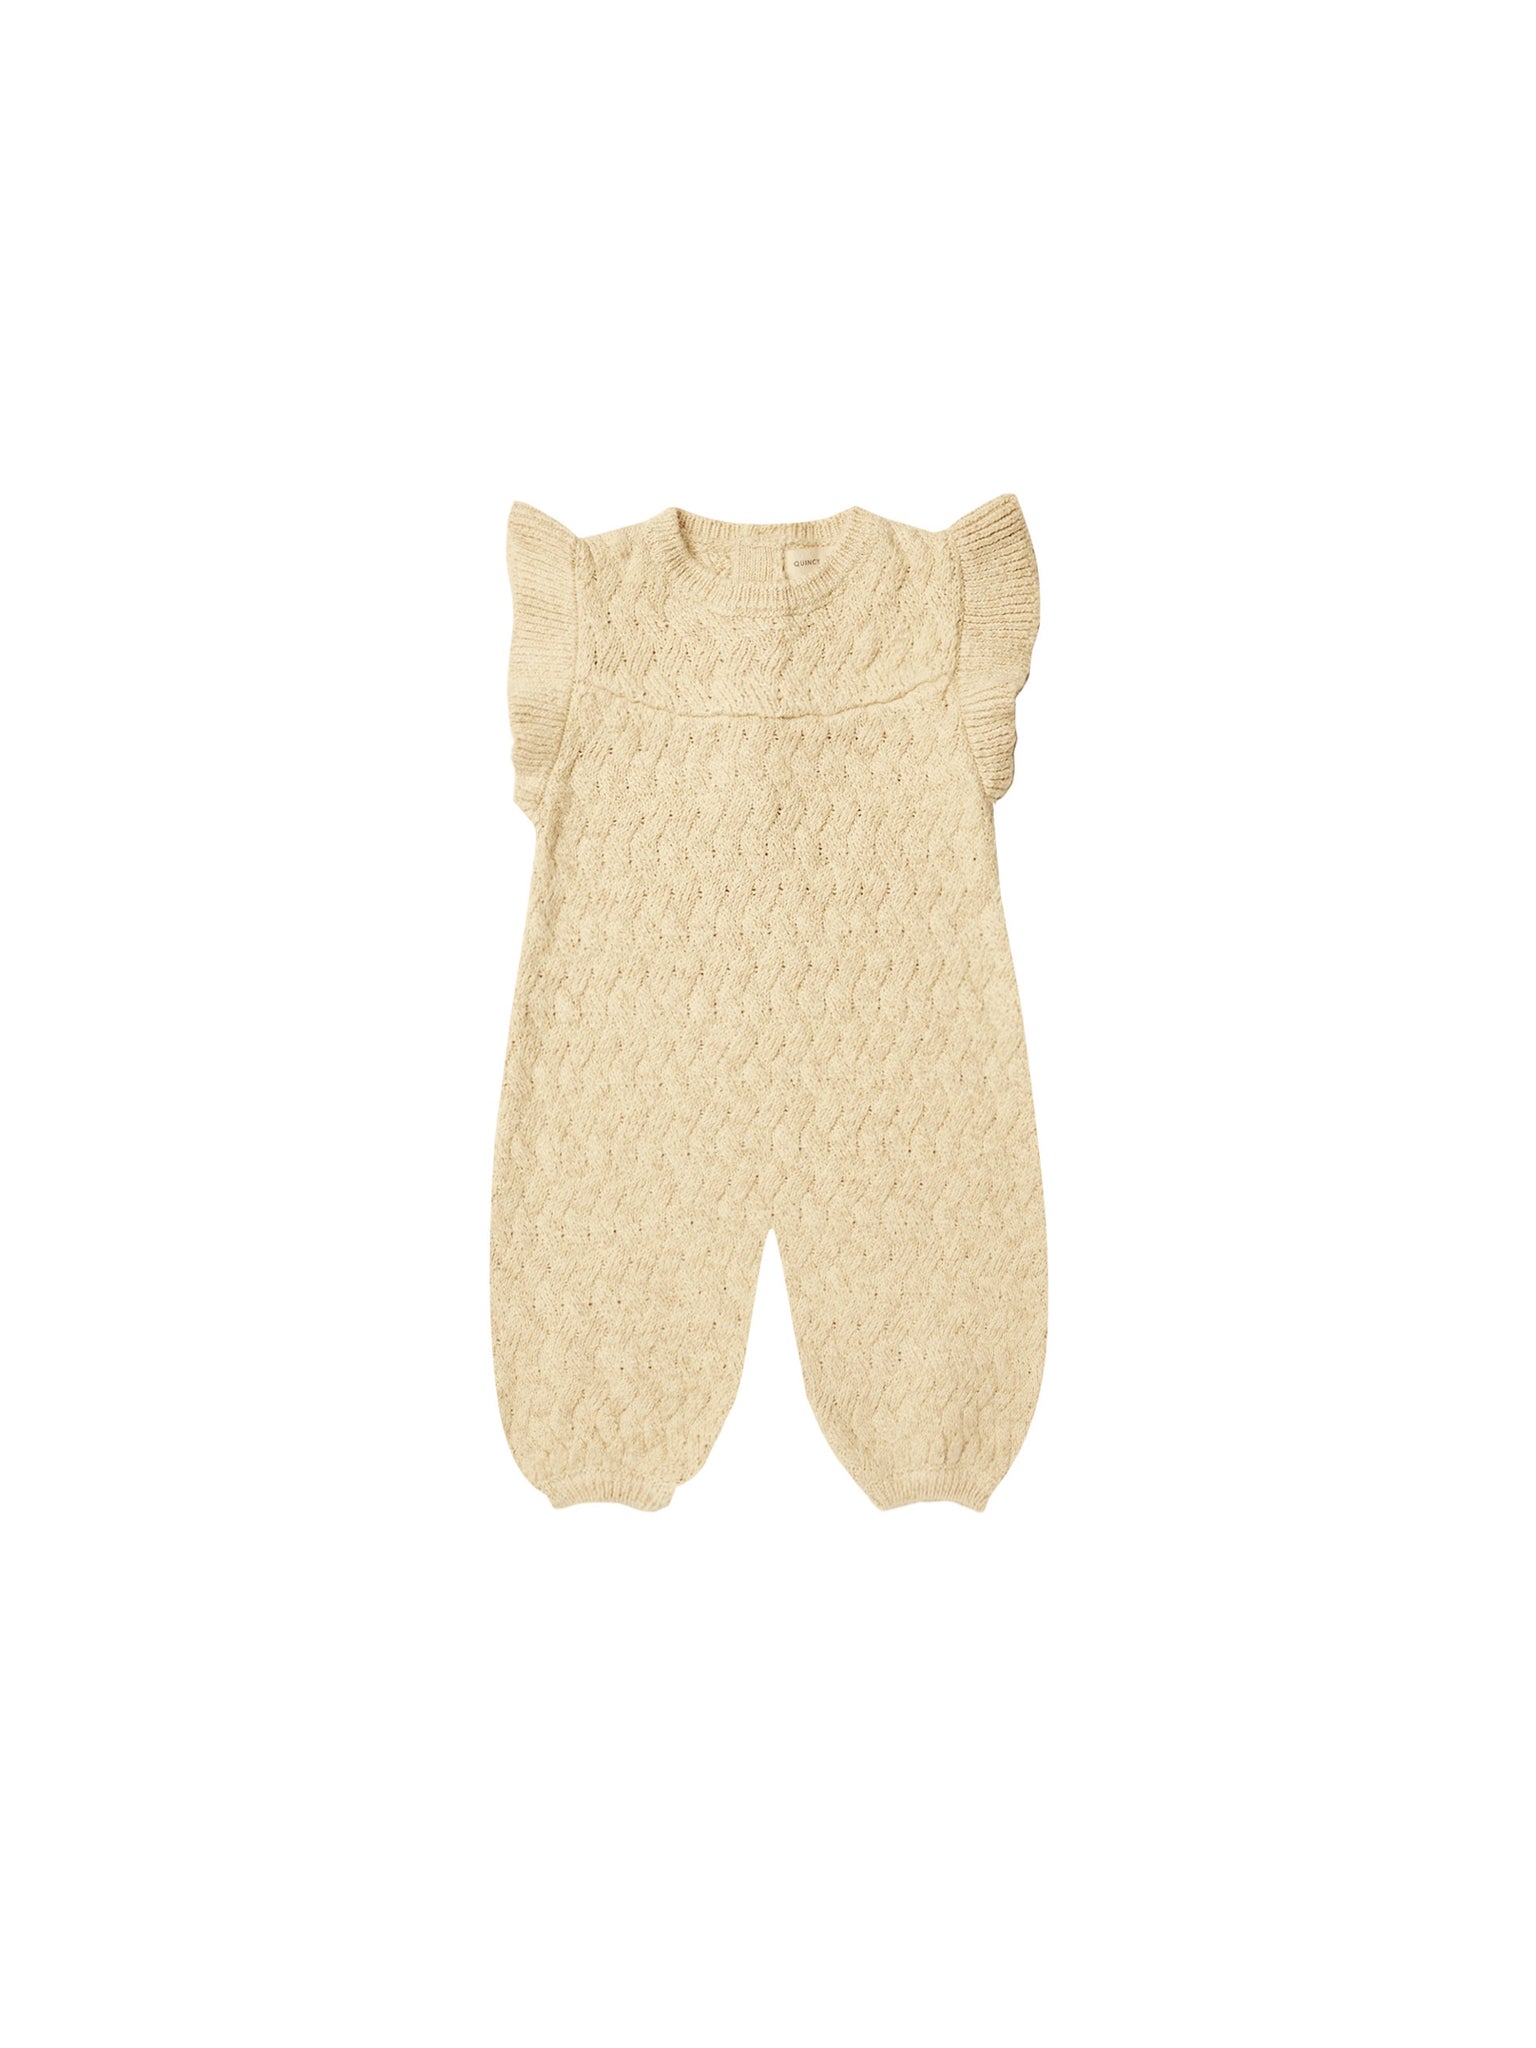 Quincy Mae Mira Knit Romper - Heathered Yellow